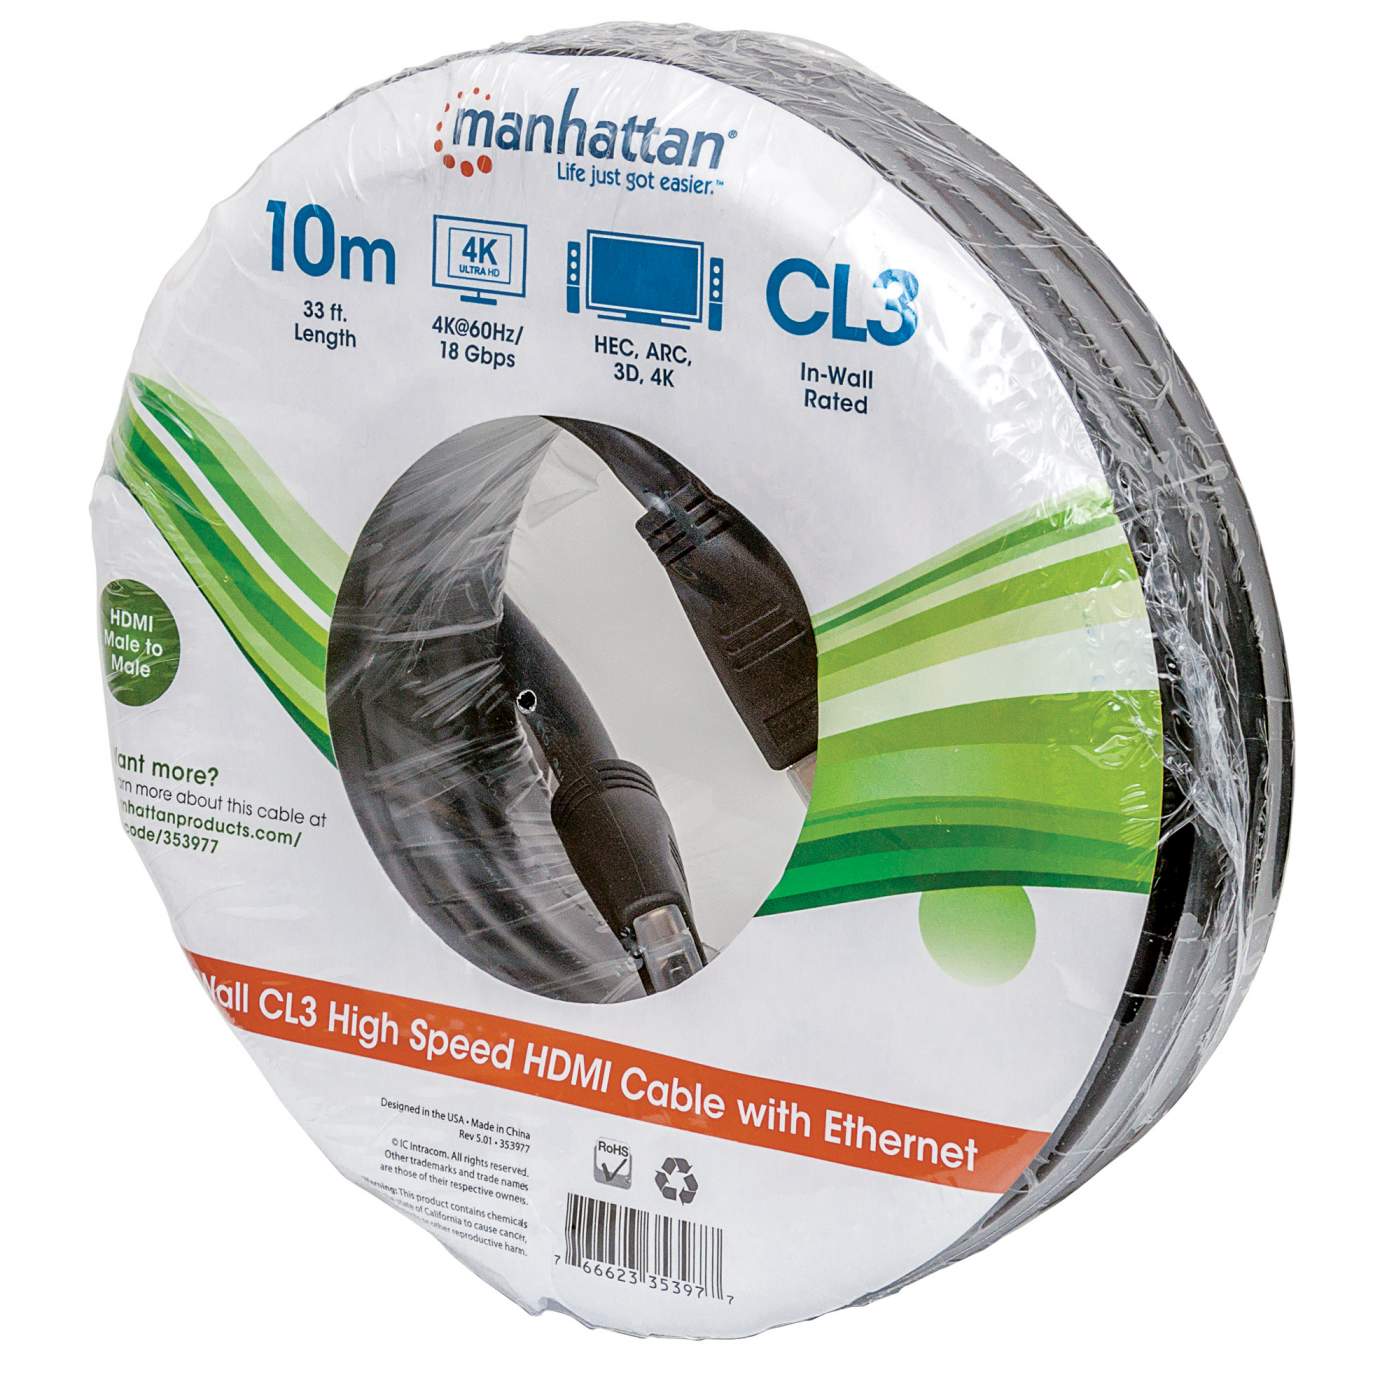 Audioquest HDMI-1 3 meter HDMI Cable PVC jacket CL3 rated in-wall